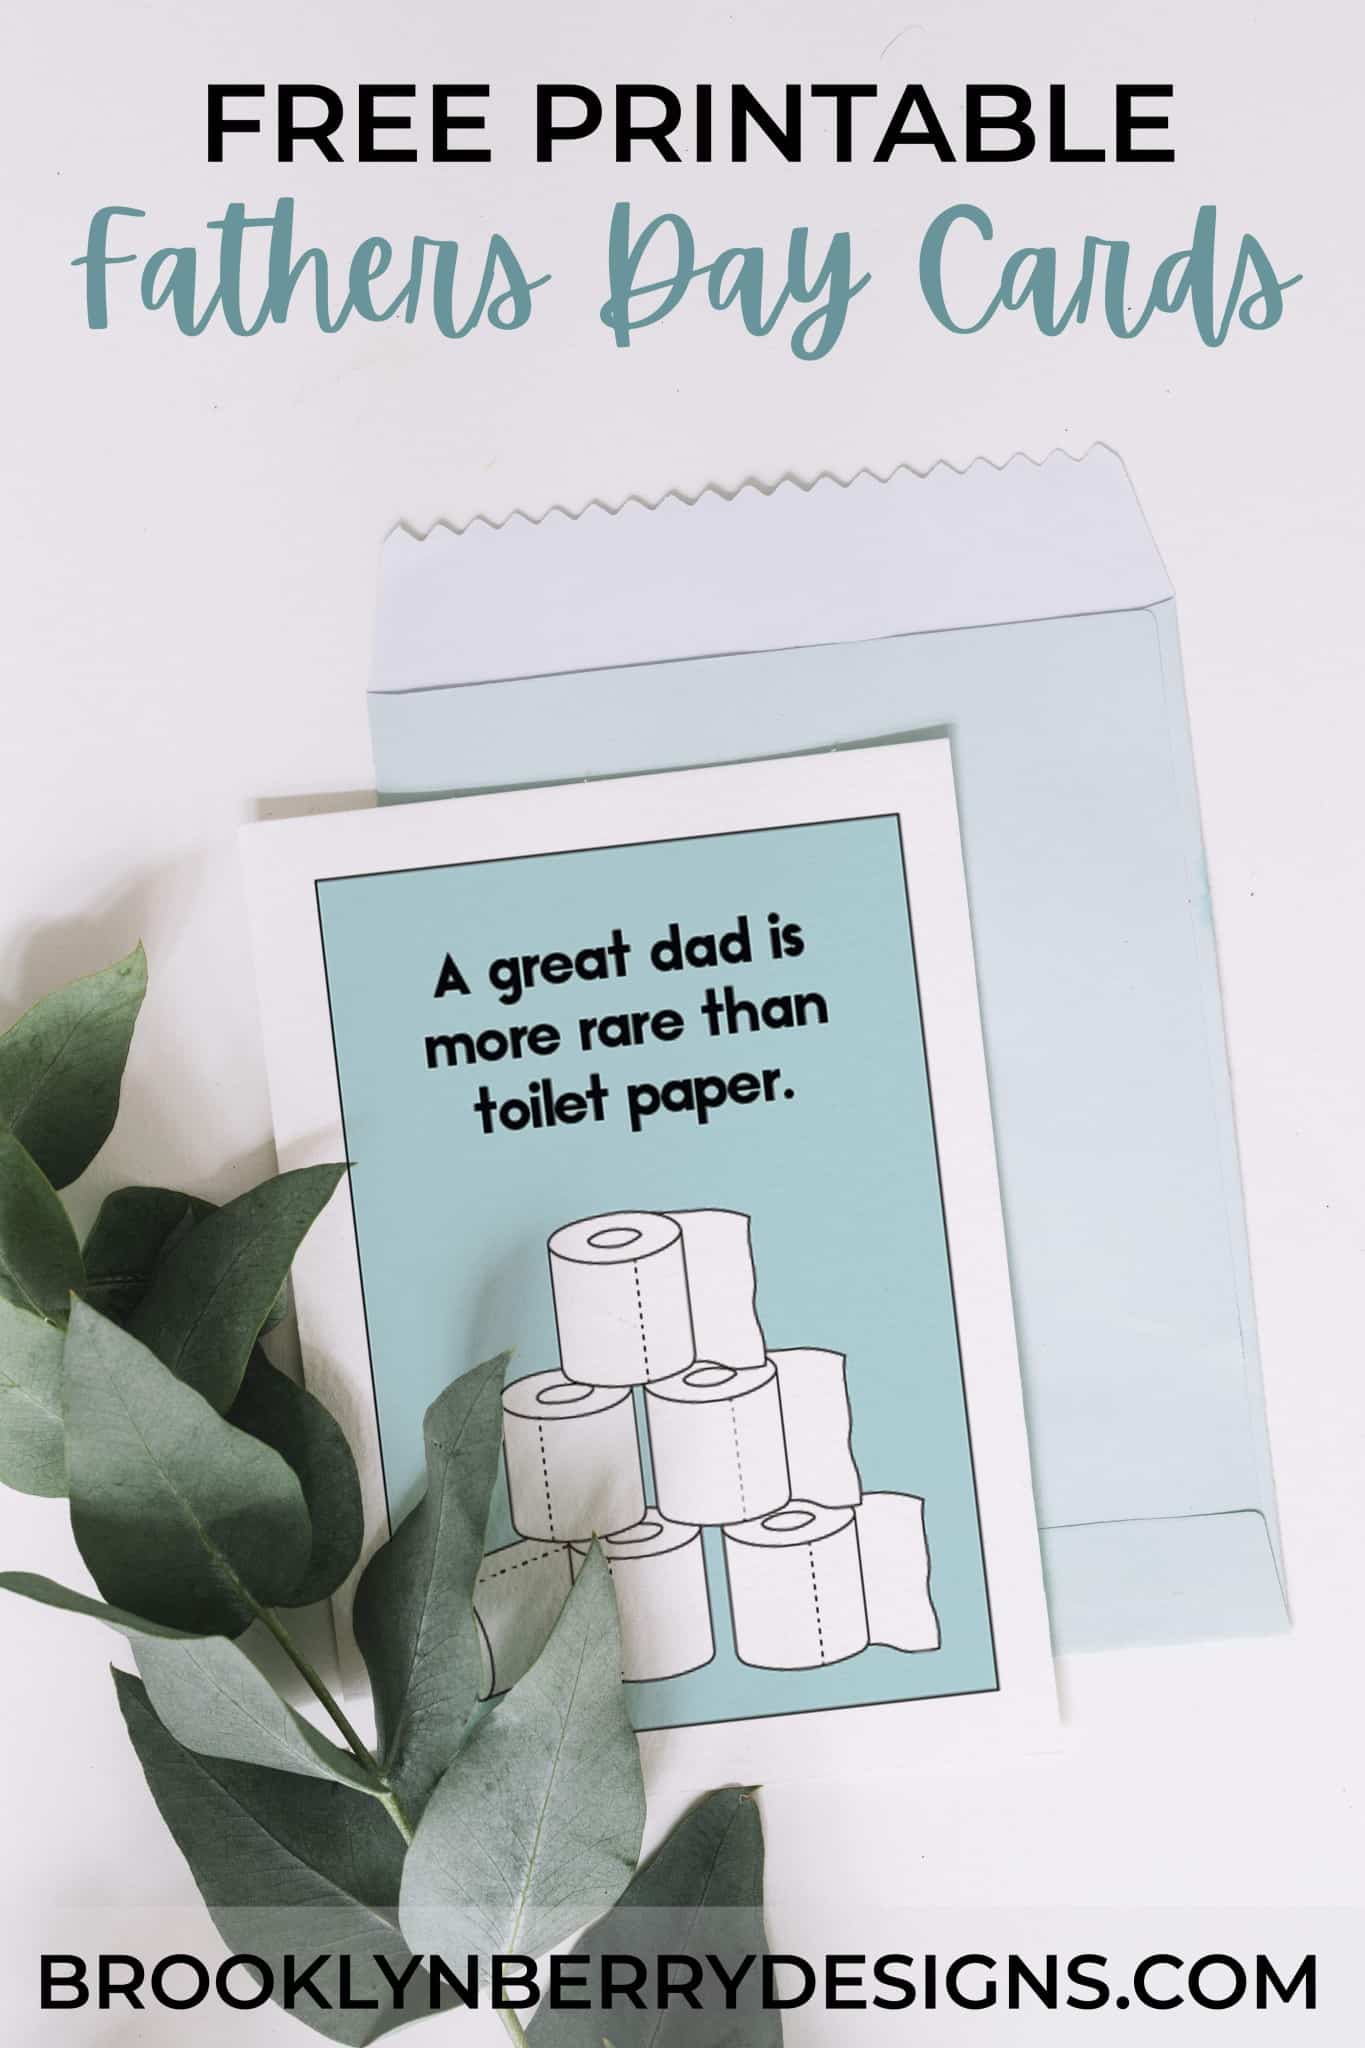 Get two free printable fathers day cards to download and print at home. Easy and free! via @brookeberry